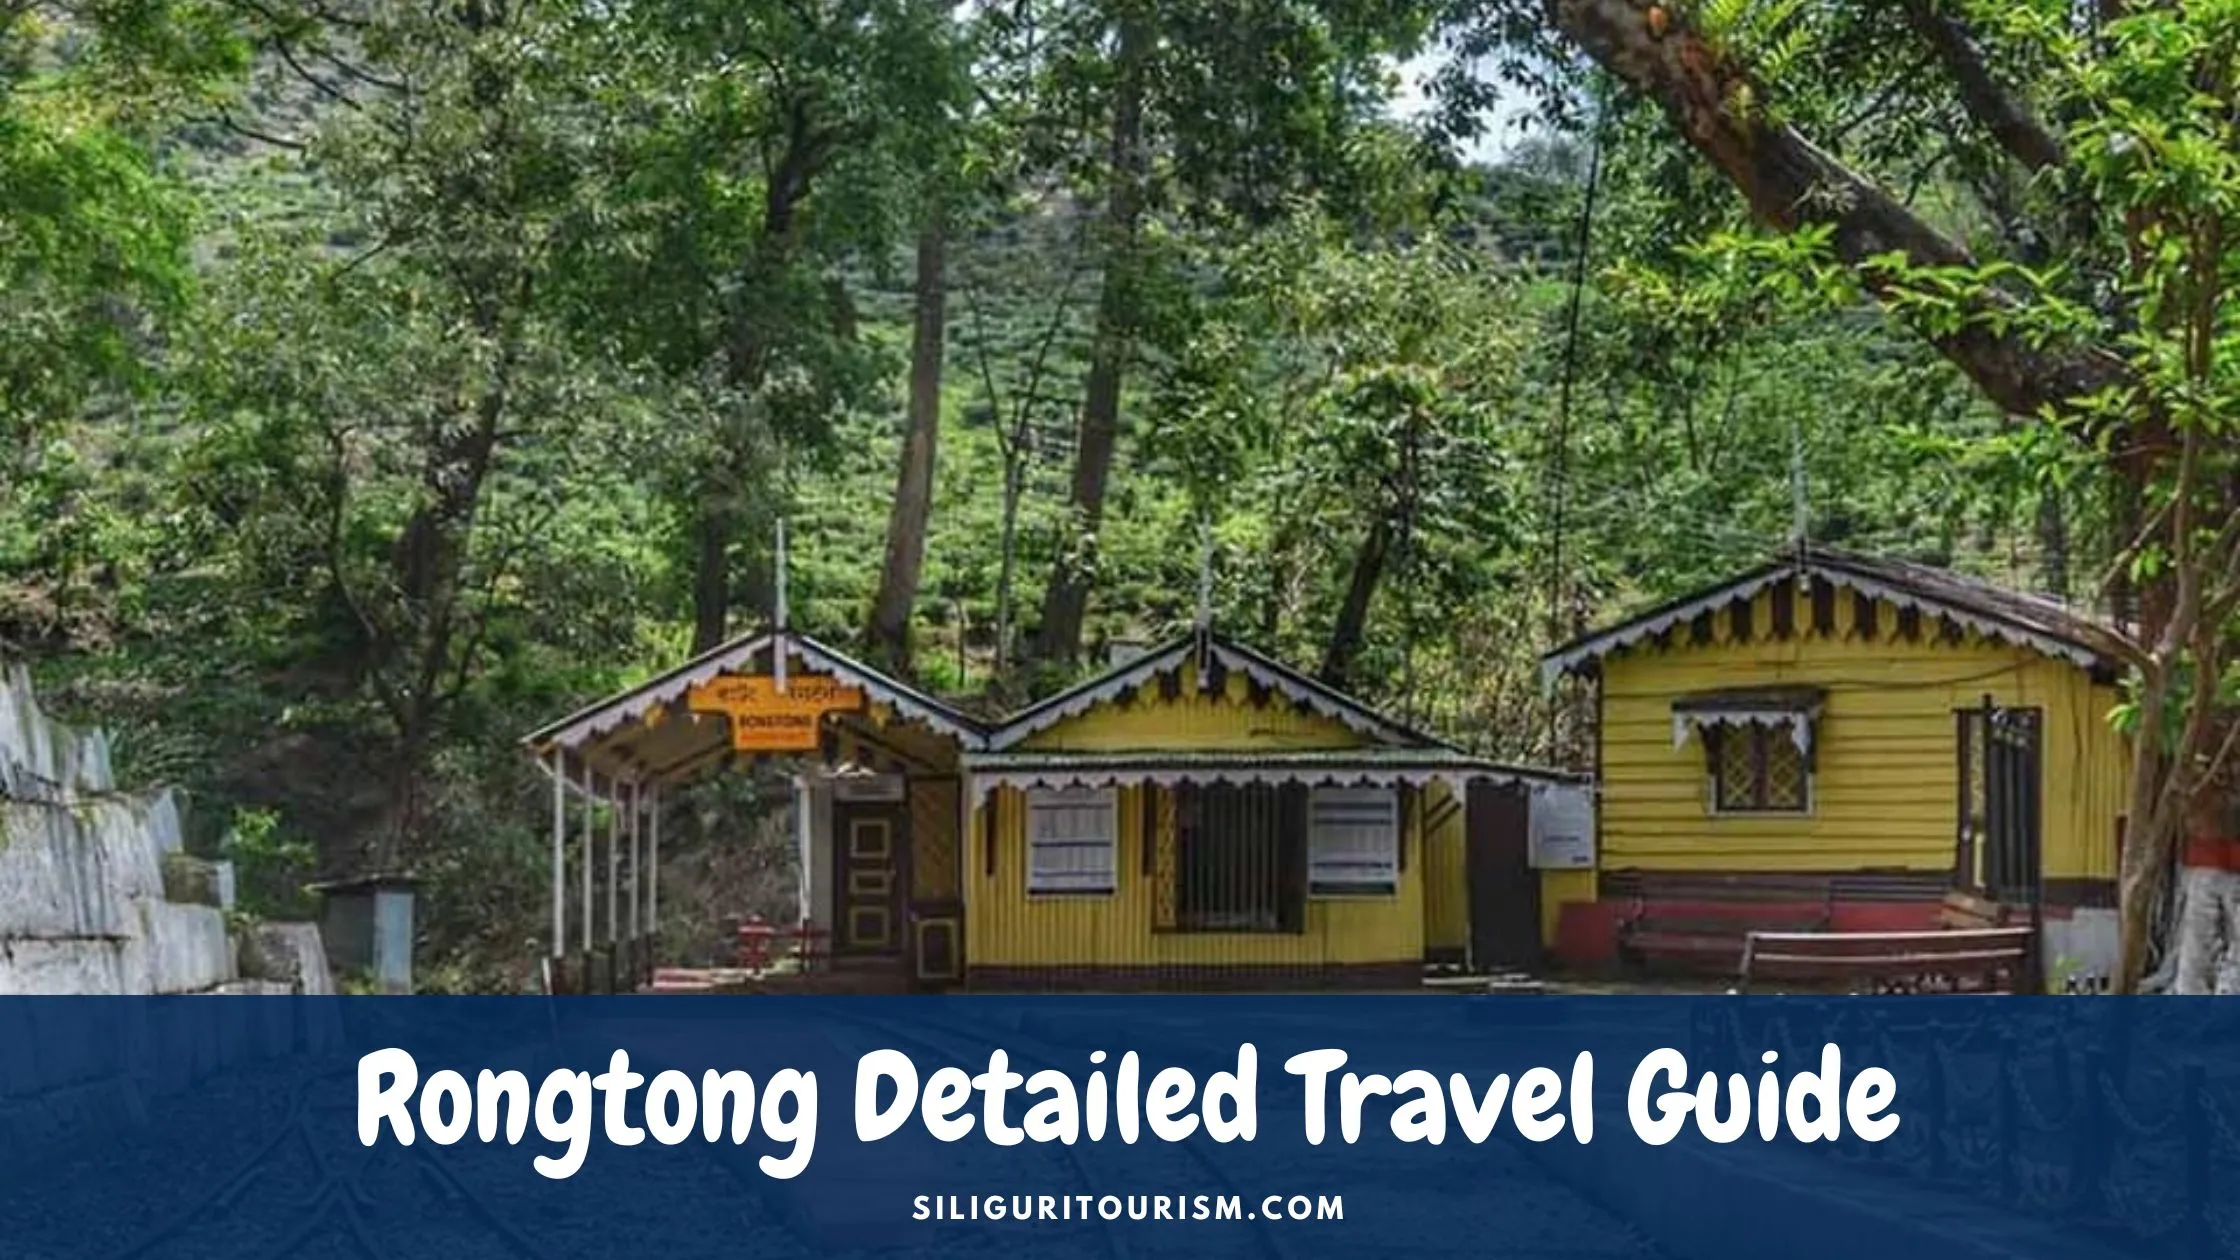 Rongtong Travel Guide